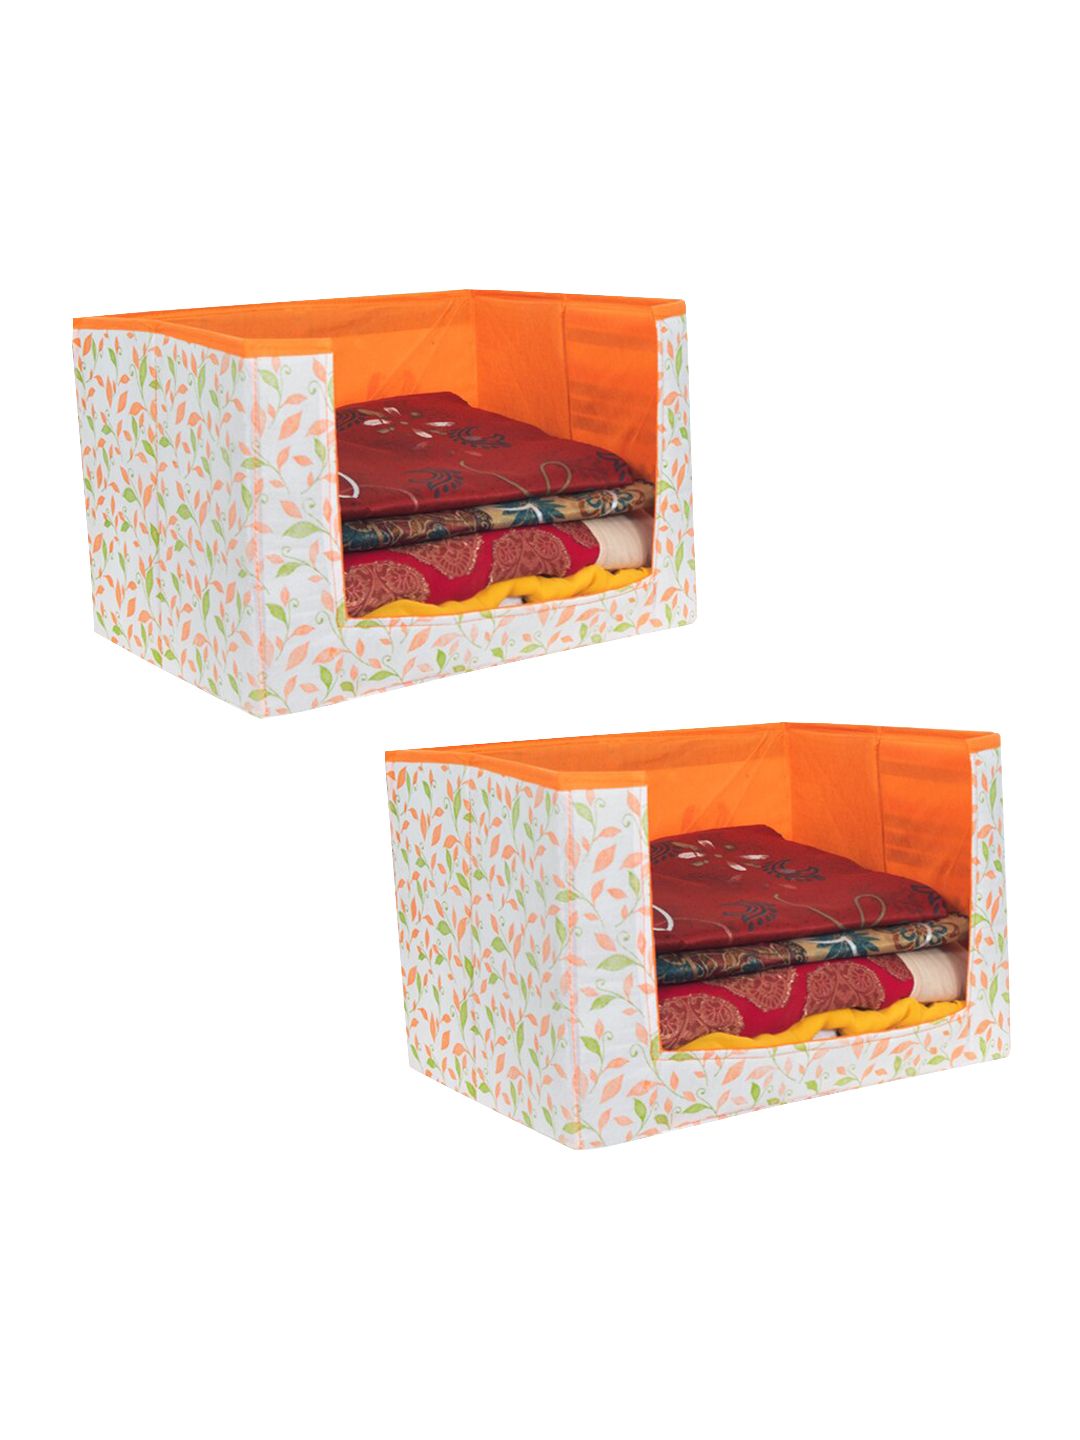 prettykrafts Set Of 2 Orange & White Leaf Printed Foldable Rectangle Saree Stacker Organisers Price in India